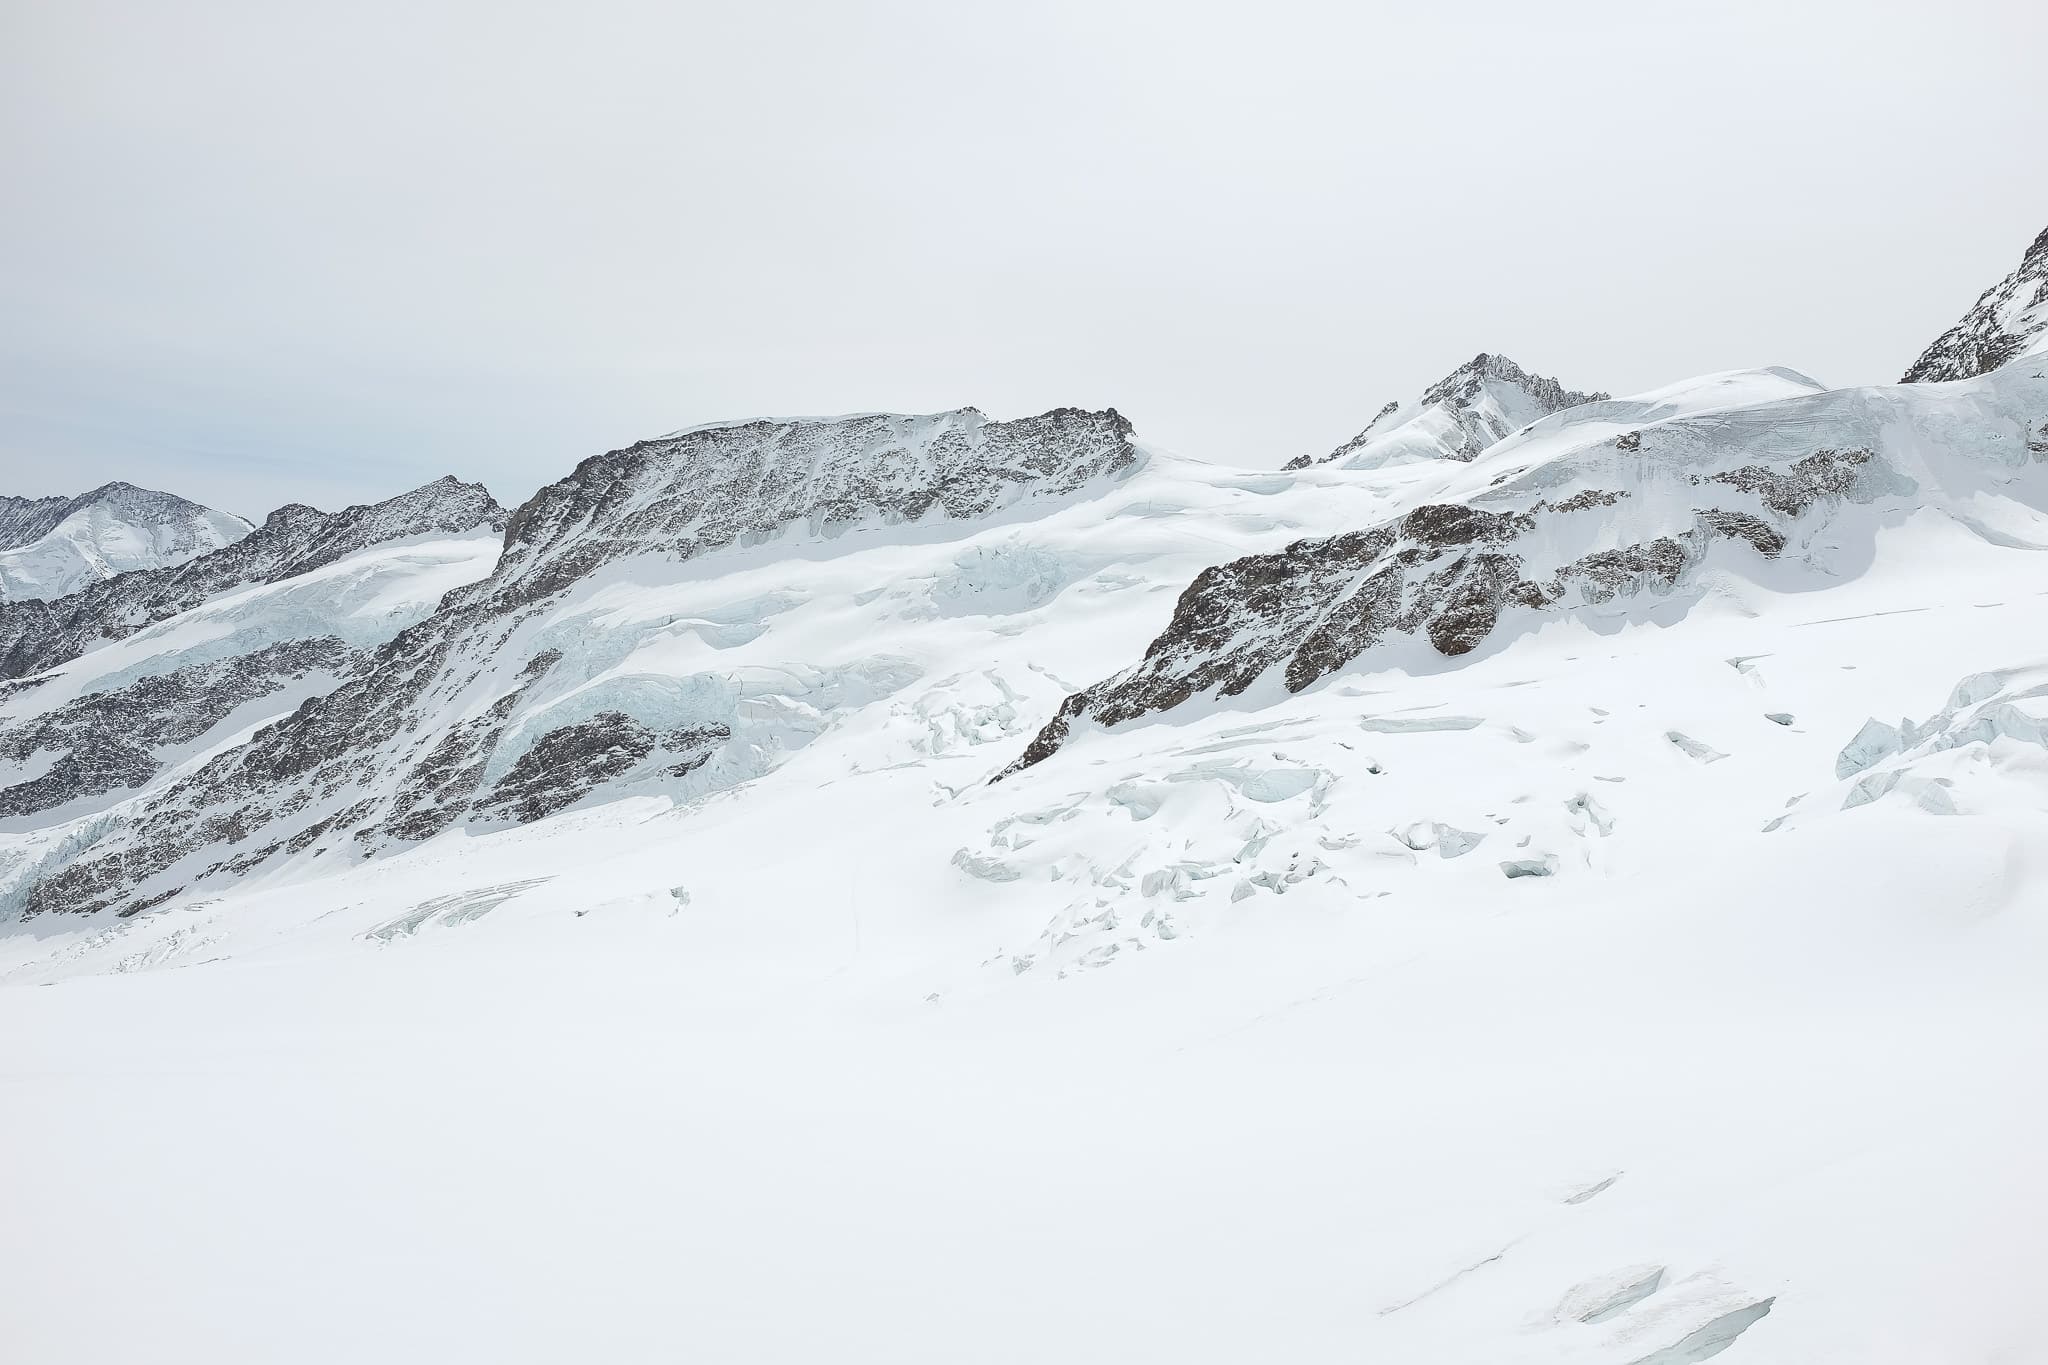 View from the Jungfraujoch